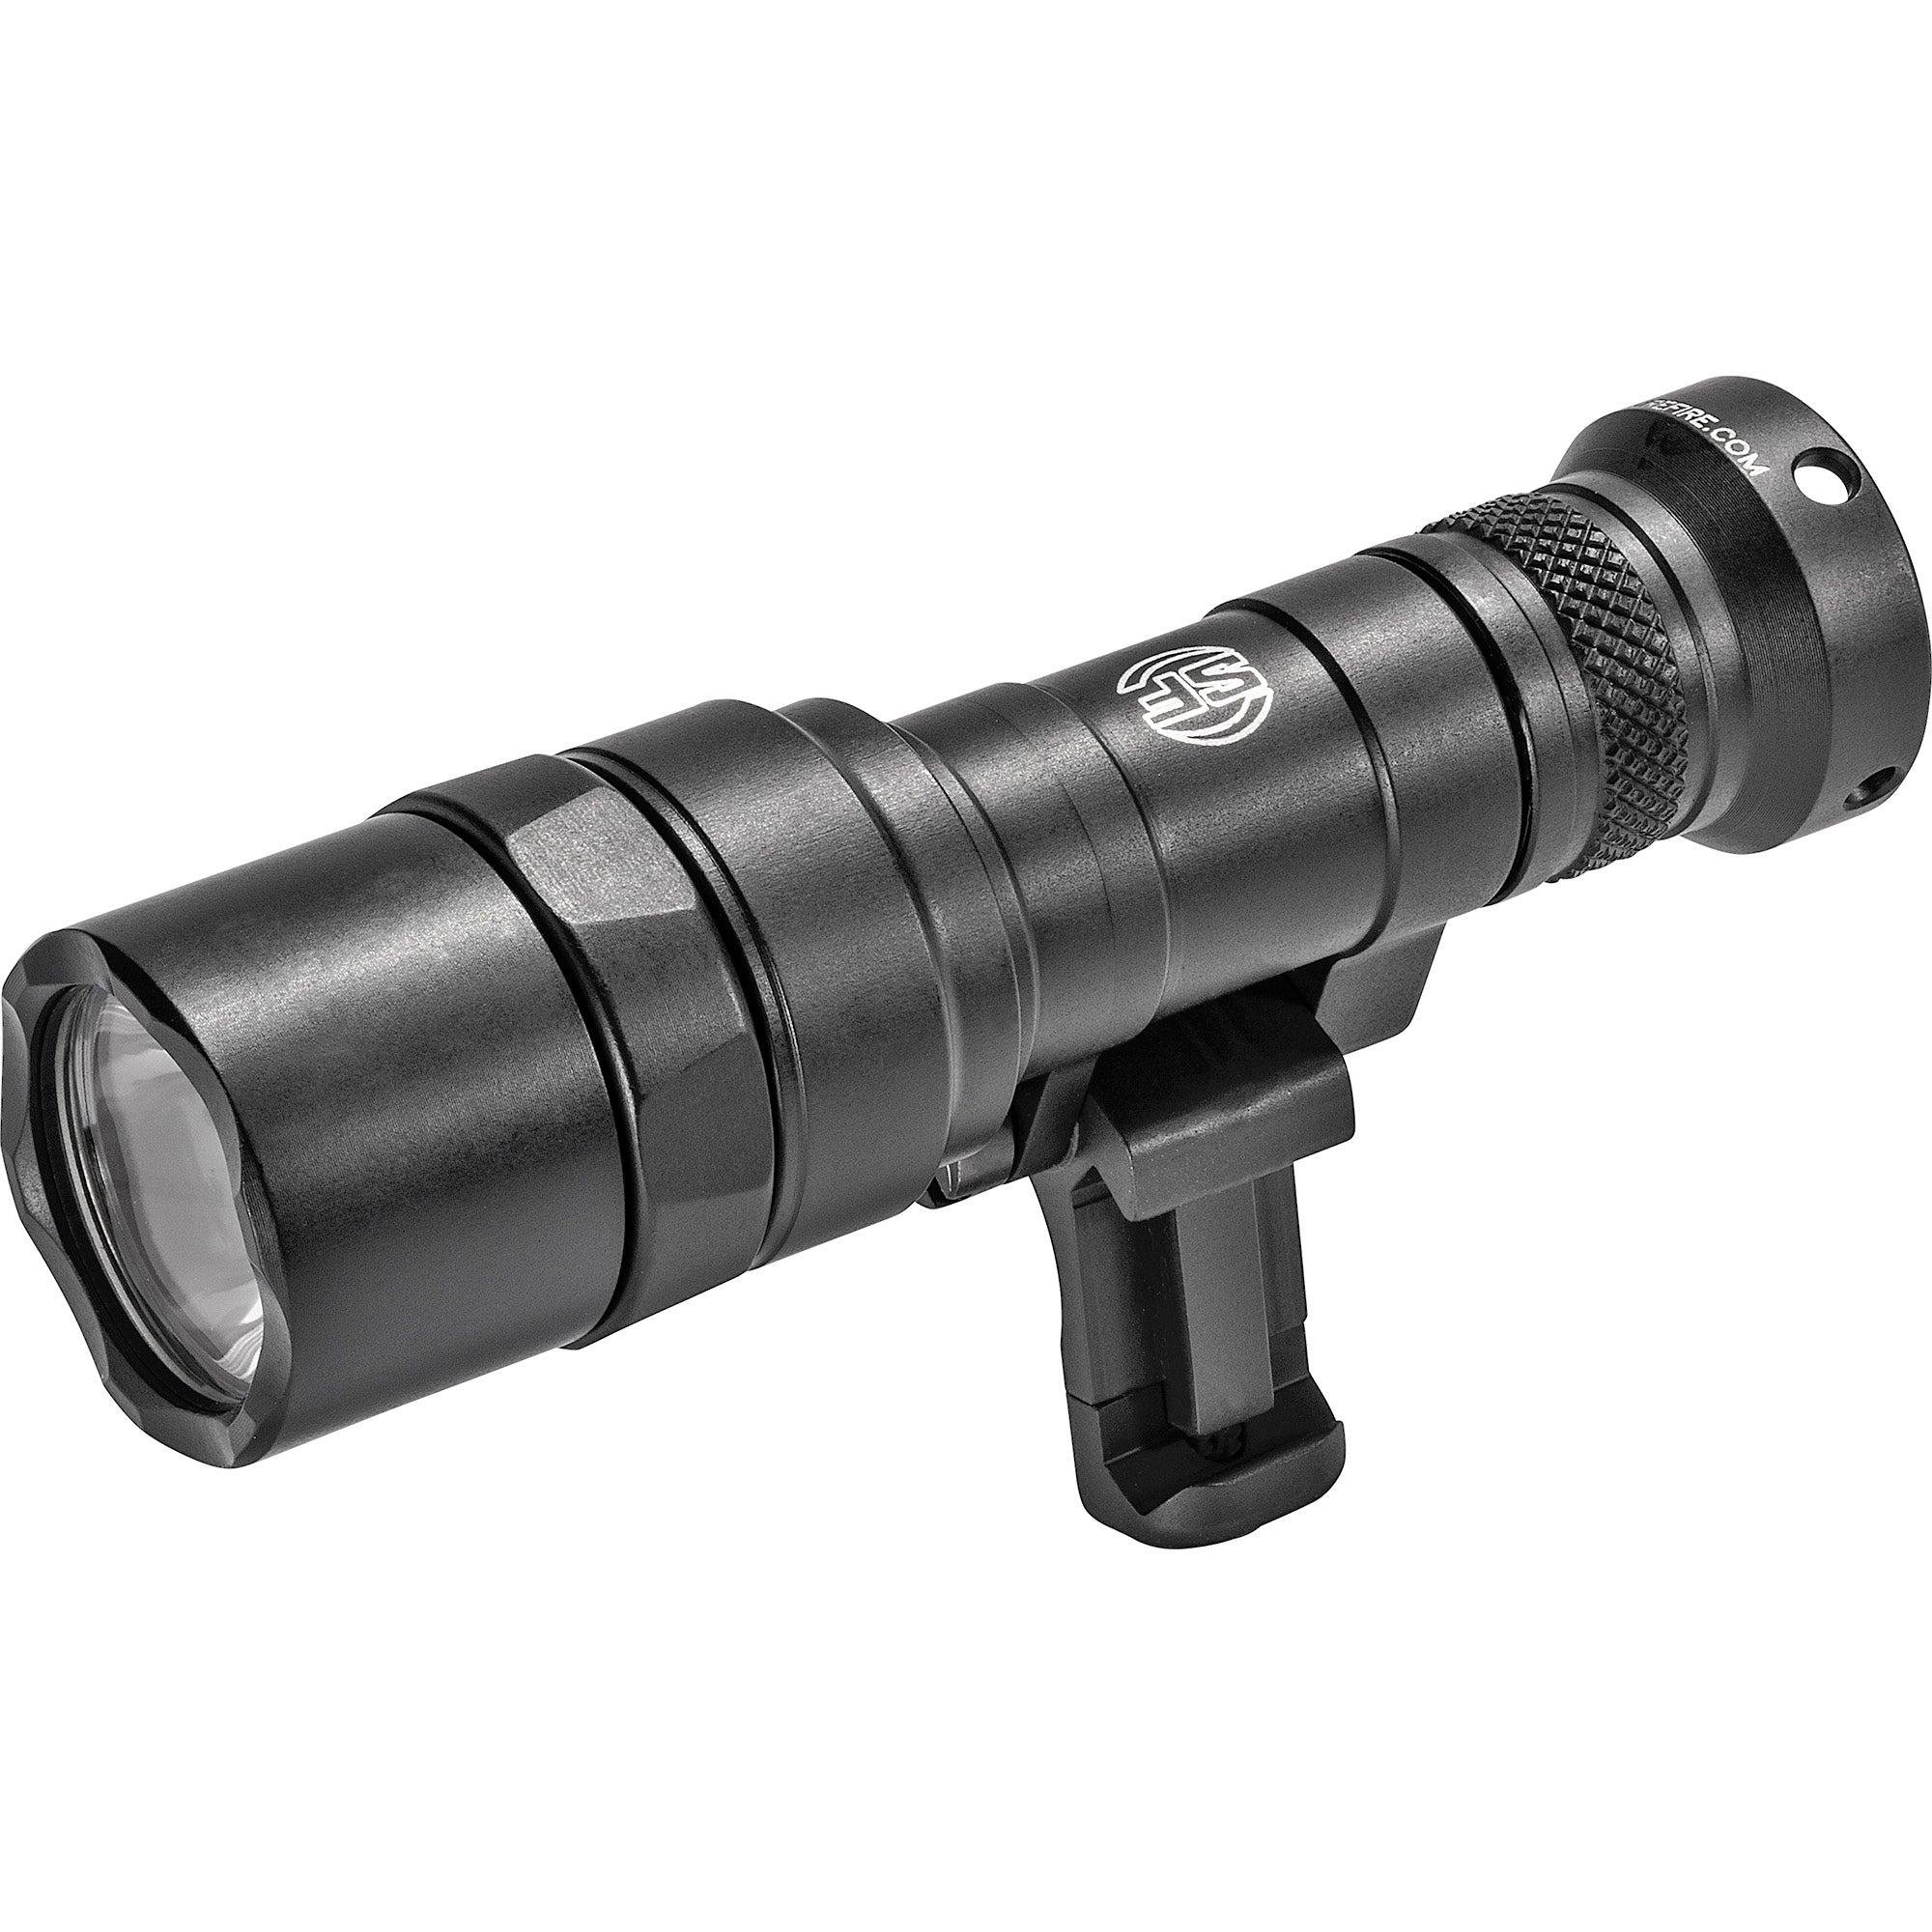 Surefire M340C Scout Pro Flashlight in black, emitting 500 lumens, equipped with 1913 Picatinny and M-LOK mounts, and featuring a Z68 On/Off tailcap for secure operation.